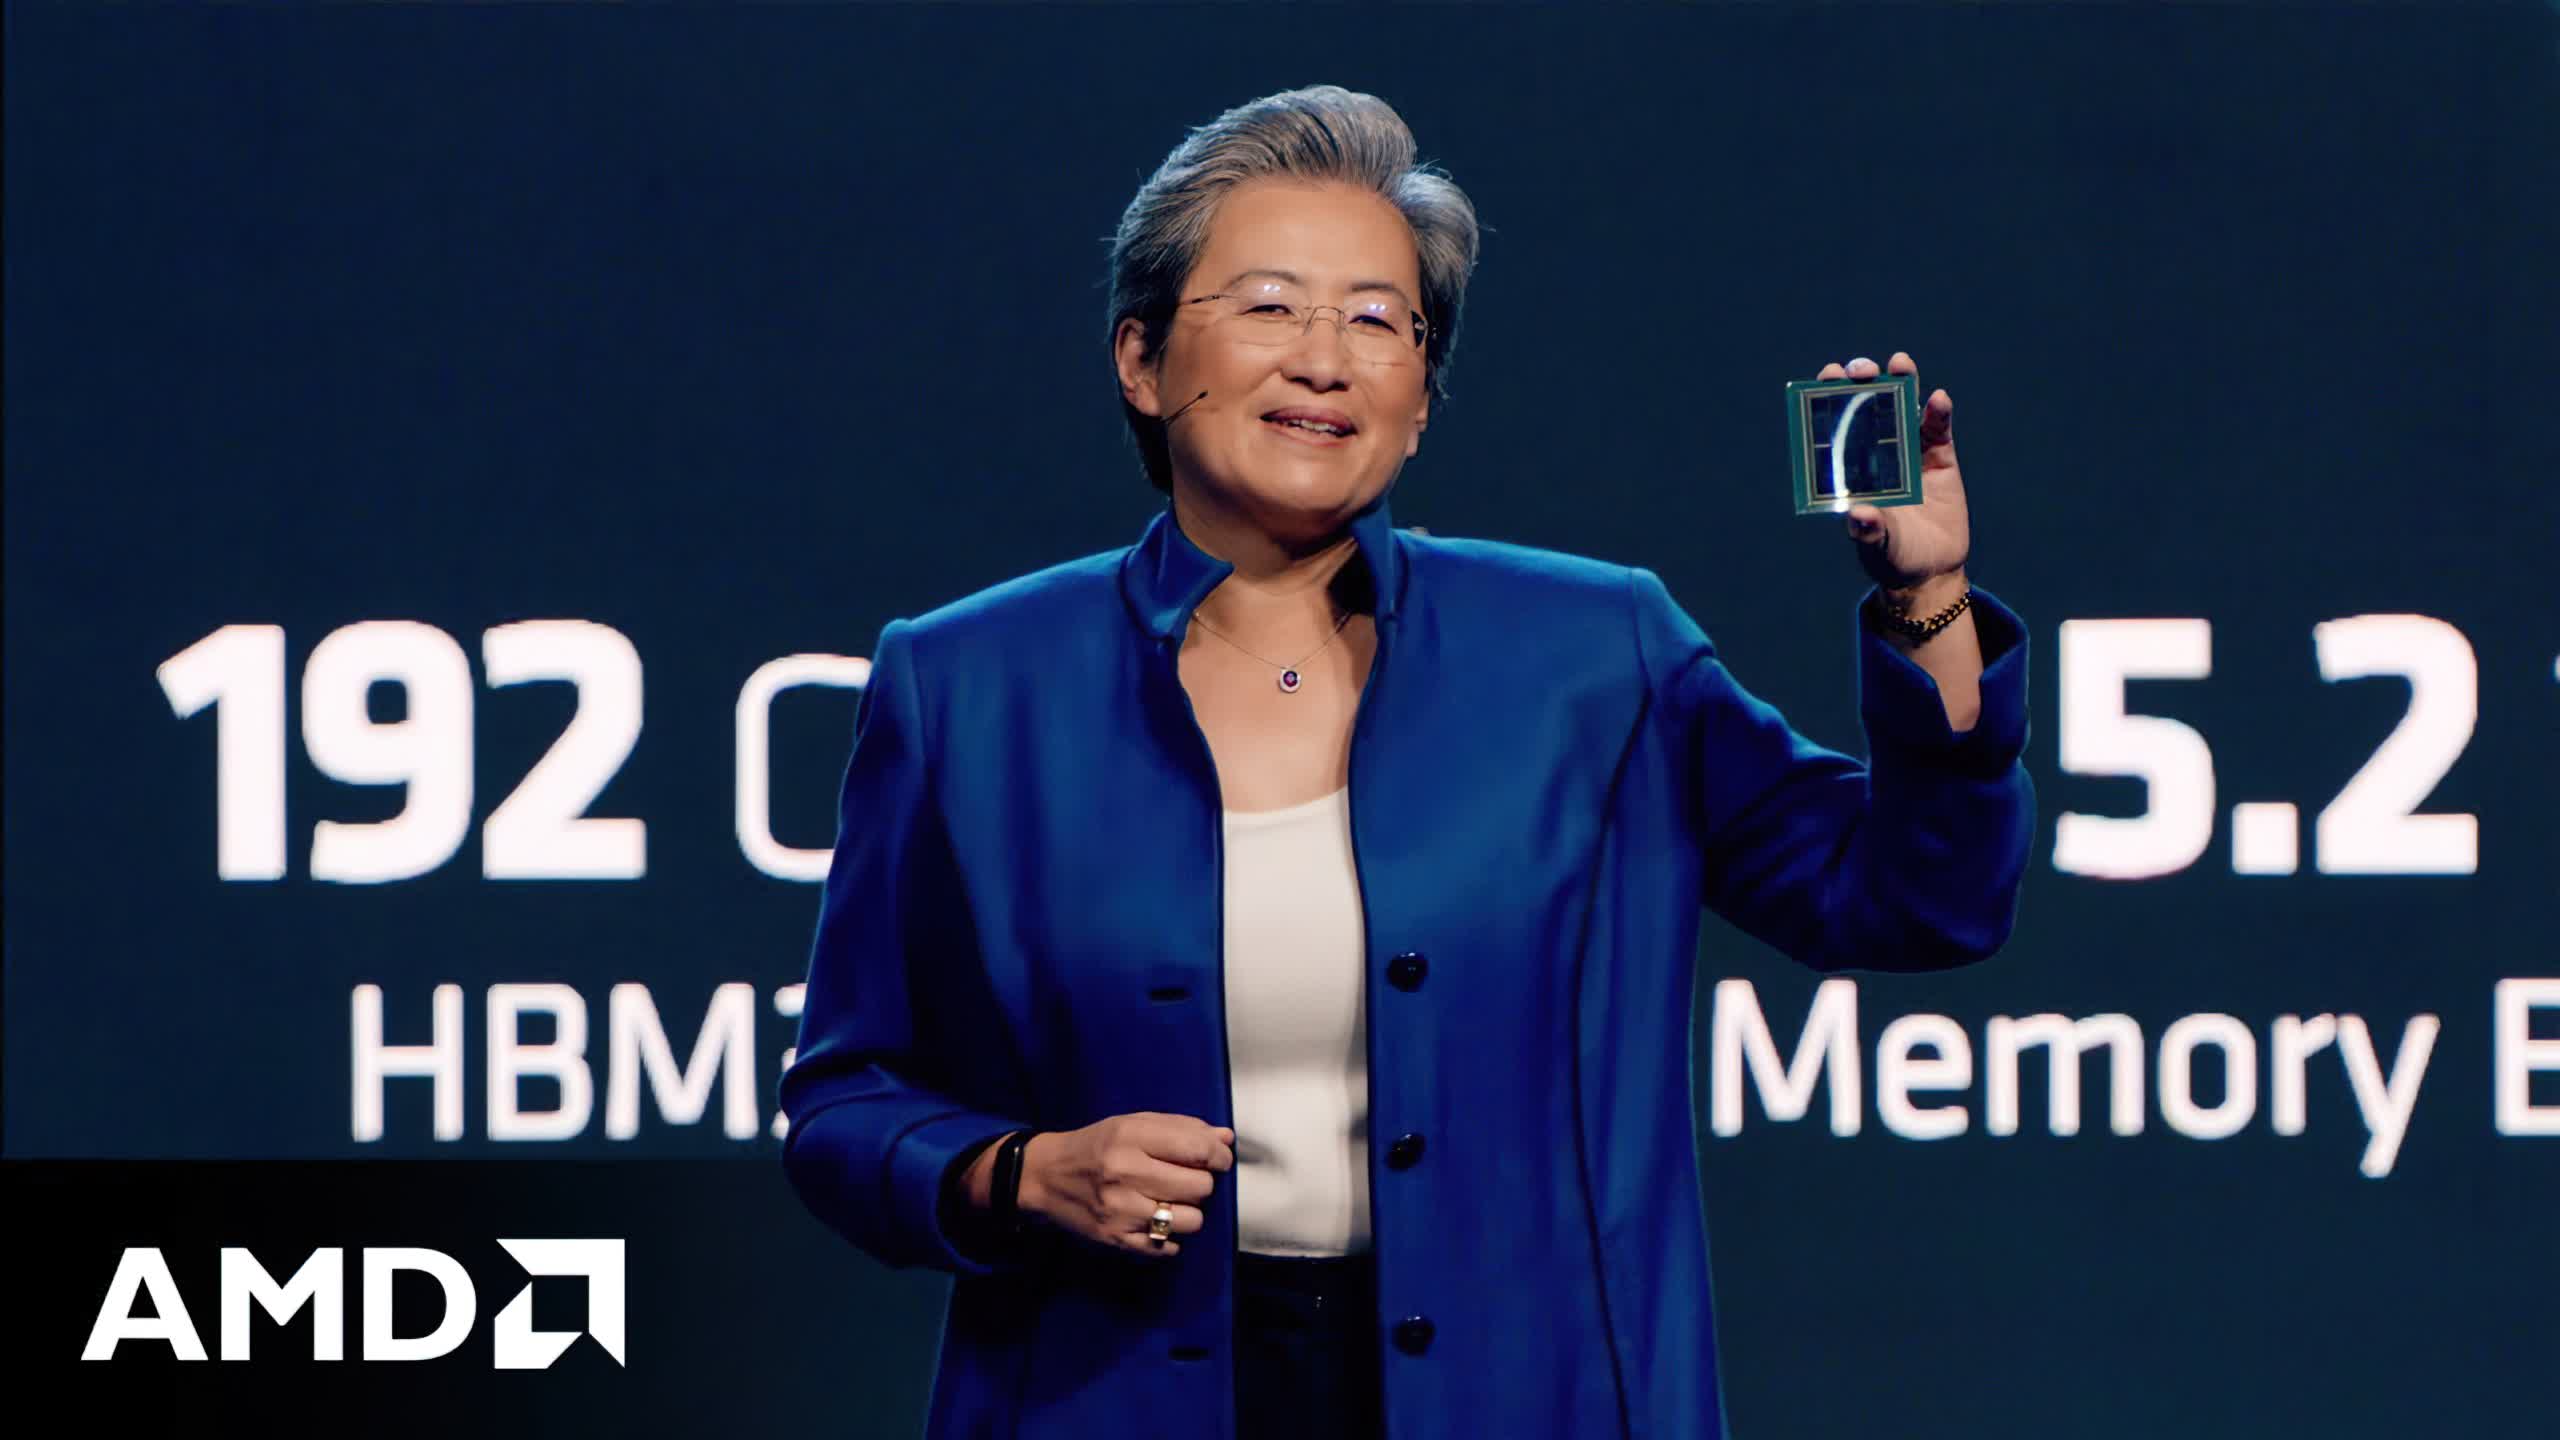 What's next for AMD?